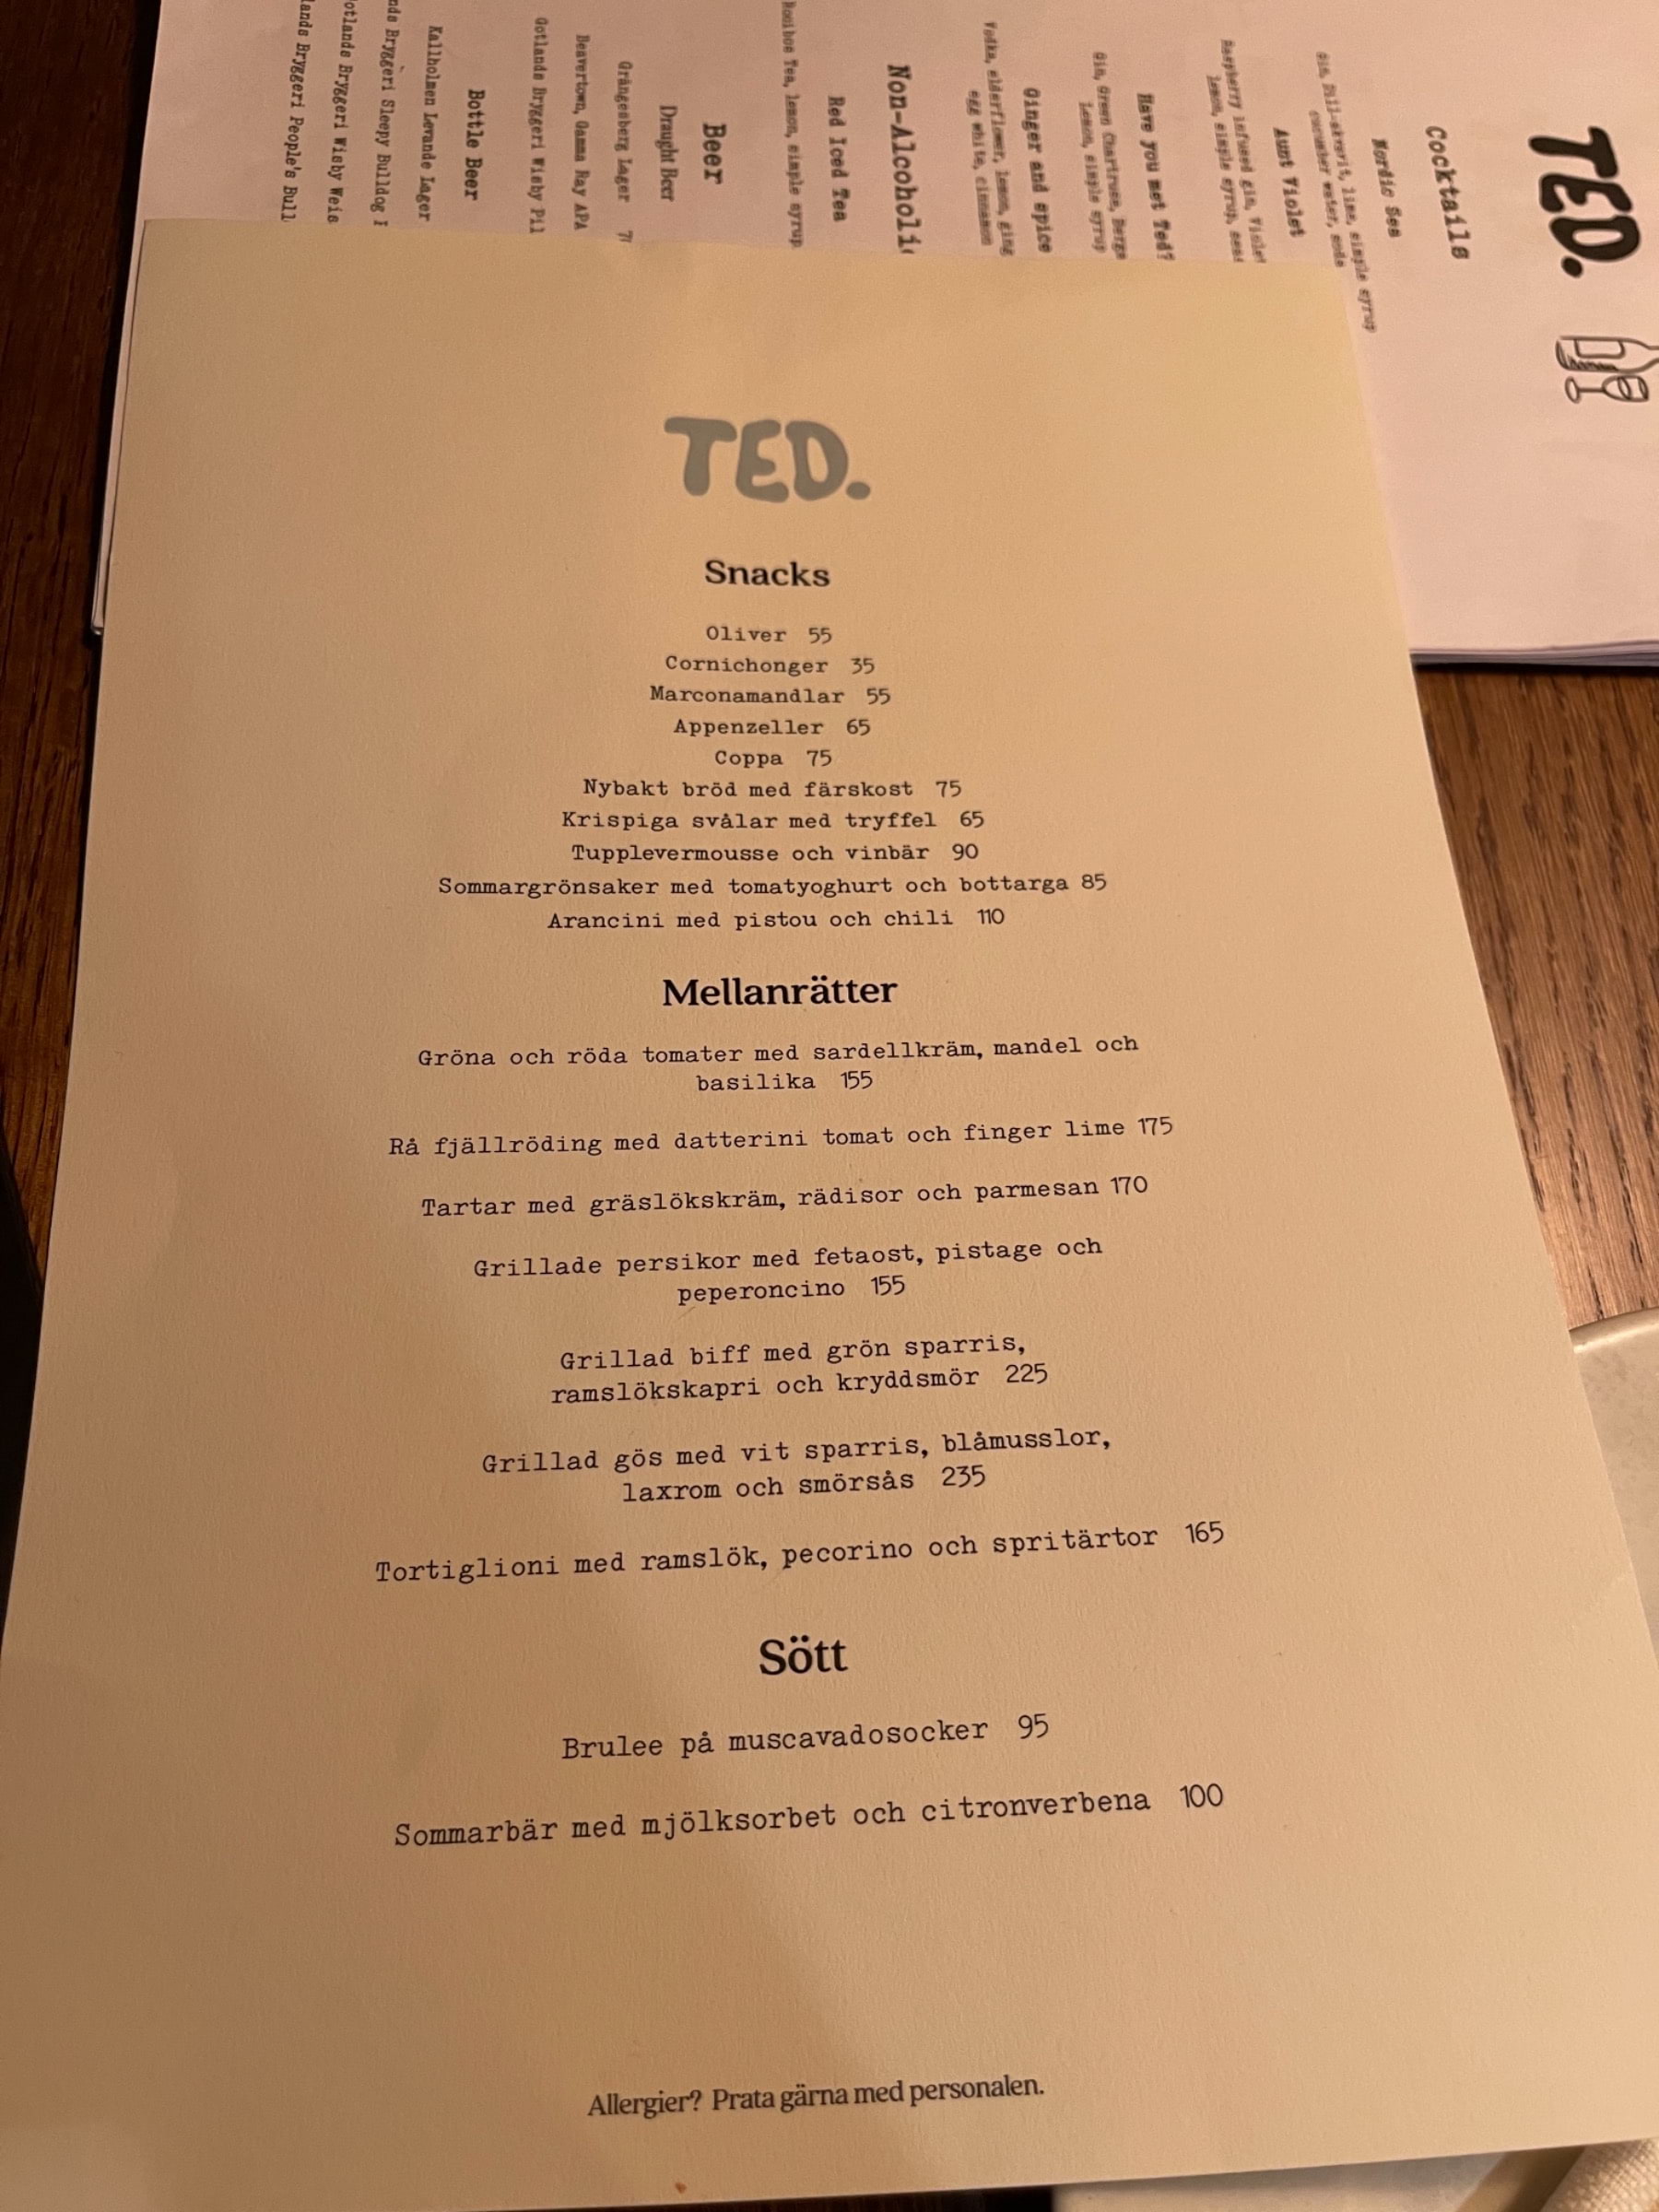 Photo from Restaurang Ted by Marcus C. (10/06/2021)